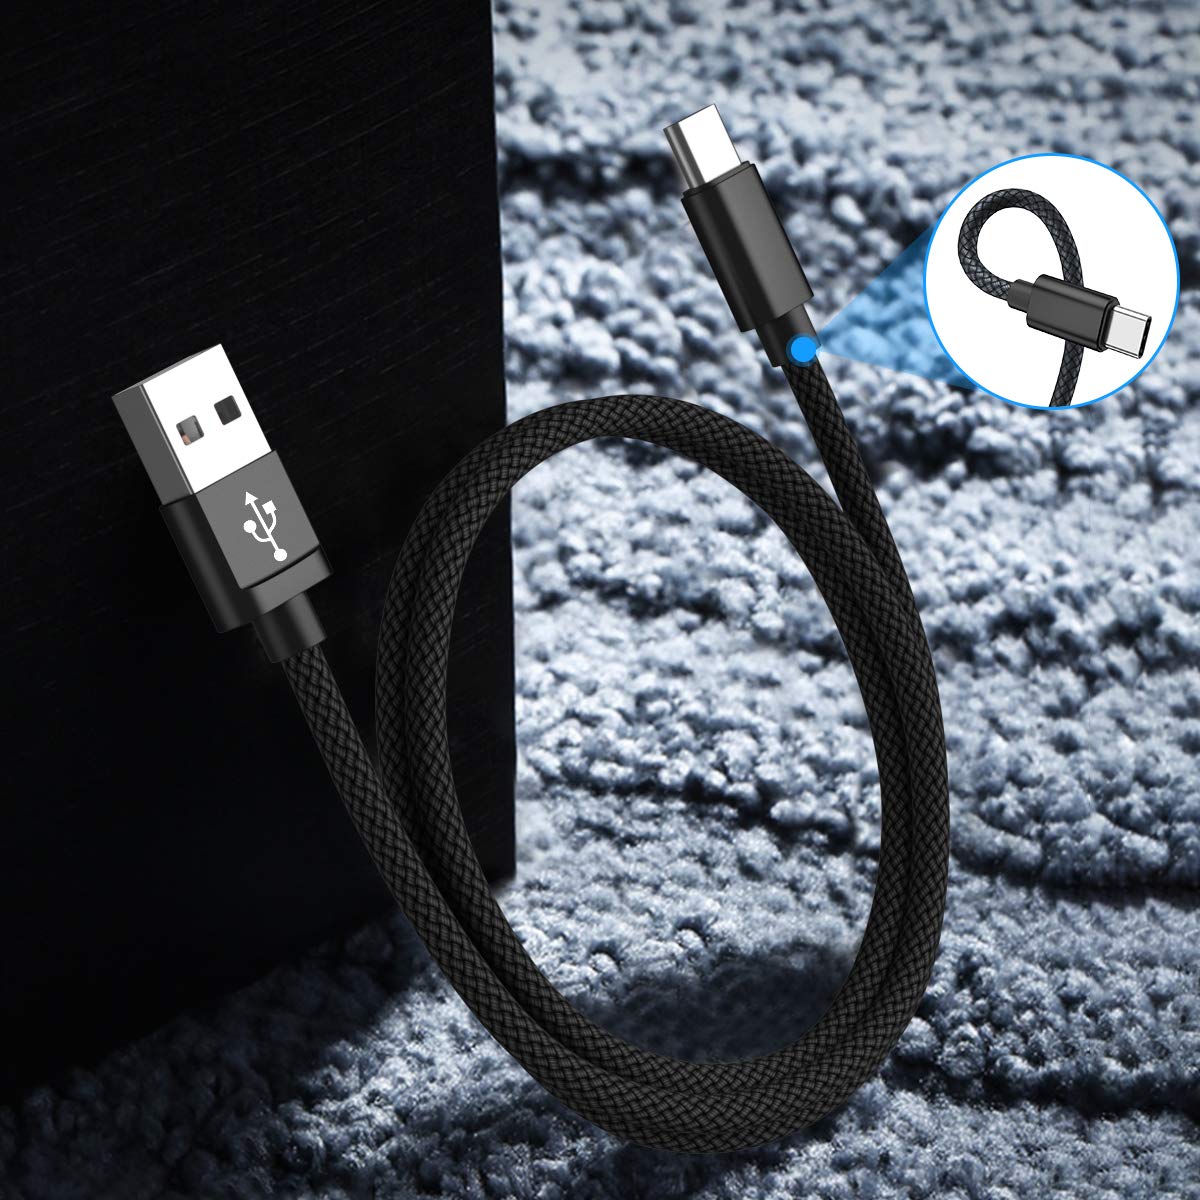 Basesailor USB Type C Charger Cable 6.6FT 2 Pack,Nylon Charging Power Cord for Samsung Galaxy S10E S23 S20 S21 S22,Moto Z3 Z4 G7 G8 G9 Play Power G Pro Fast Stylus,Motorola Razr Edge One 5G,Steam Deck